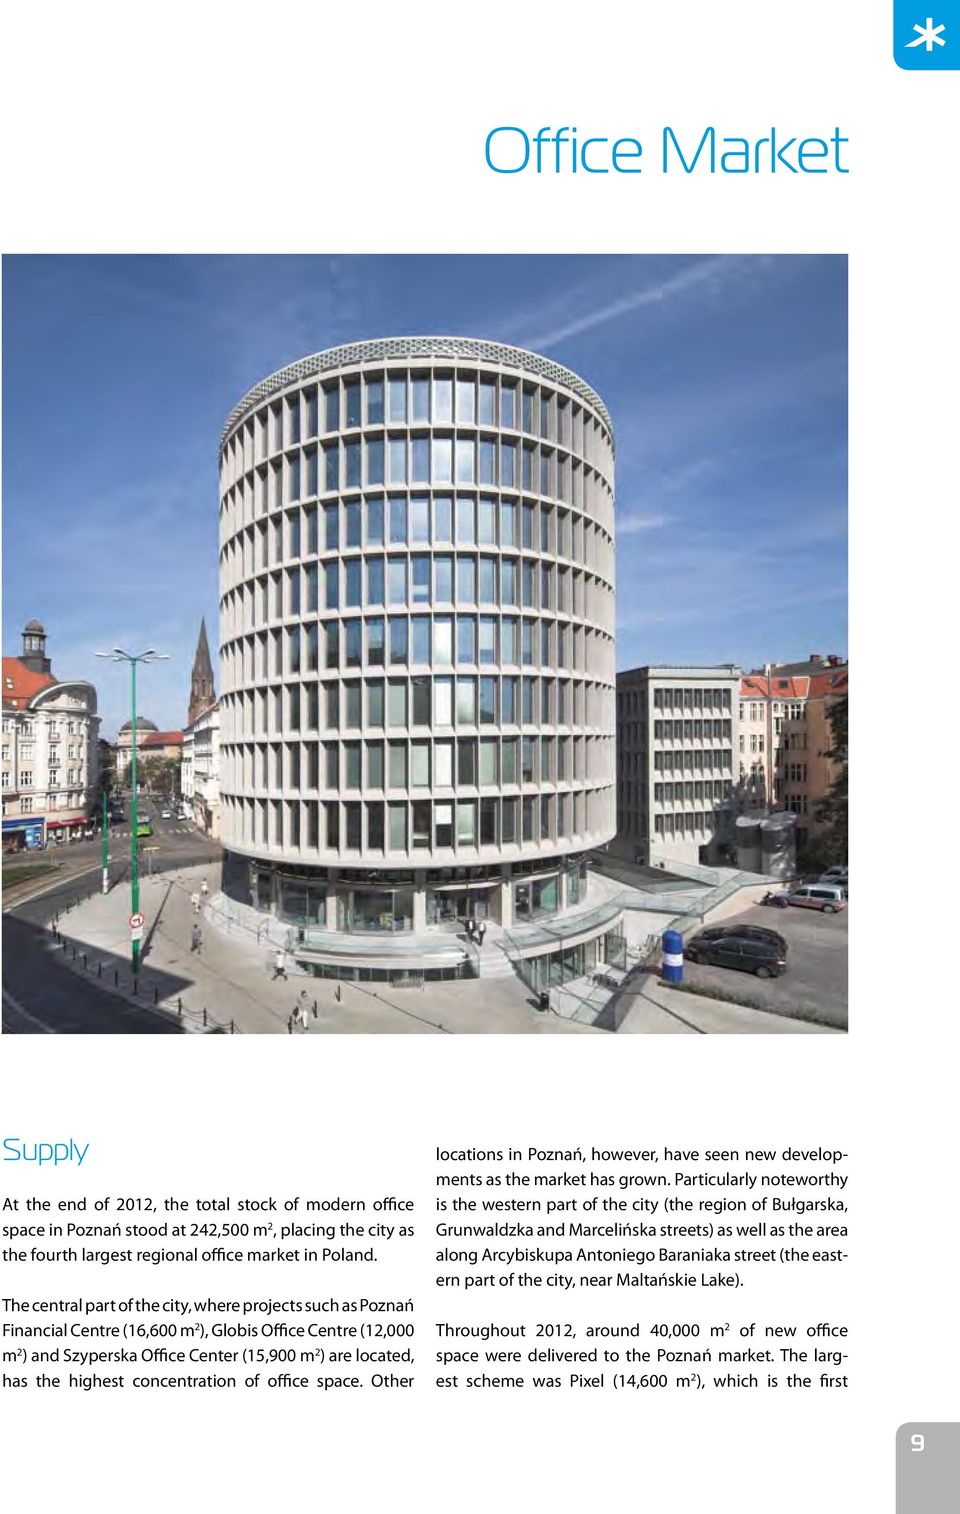 concentration of office space. Other locations in Poznań, however, have seen new developments as the market has grown.